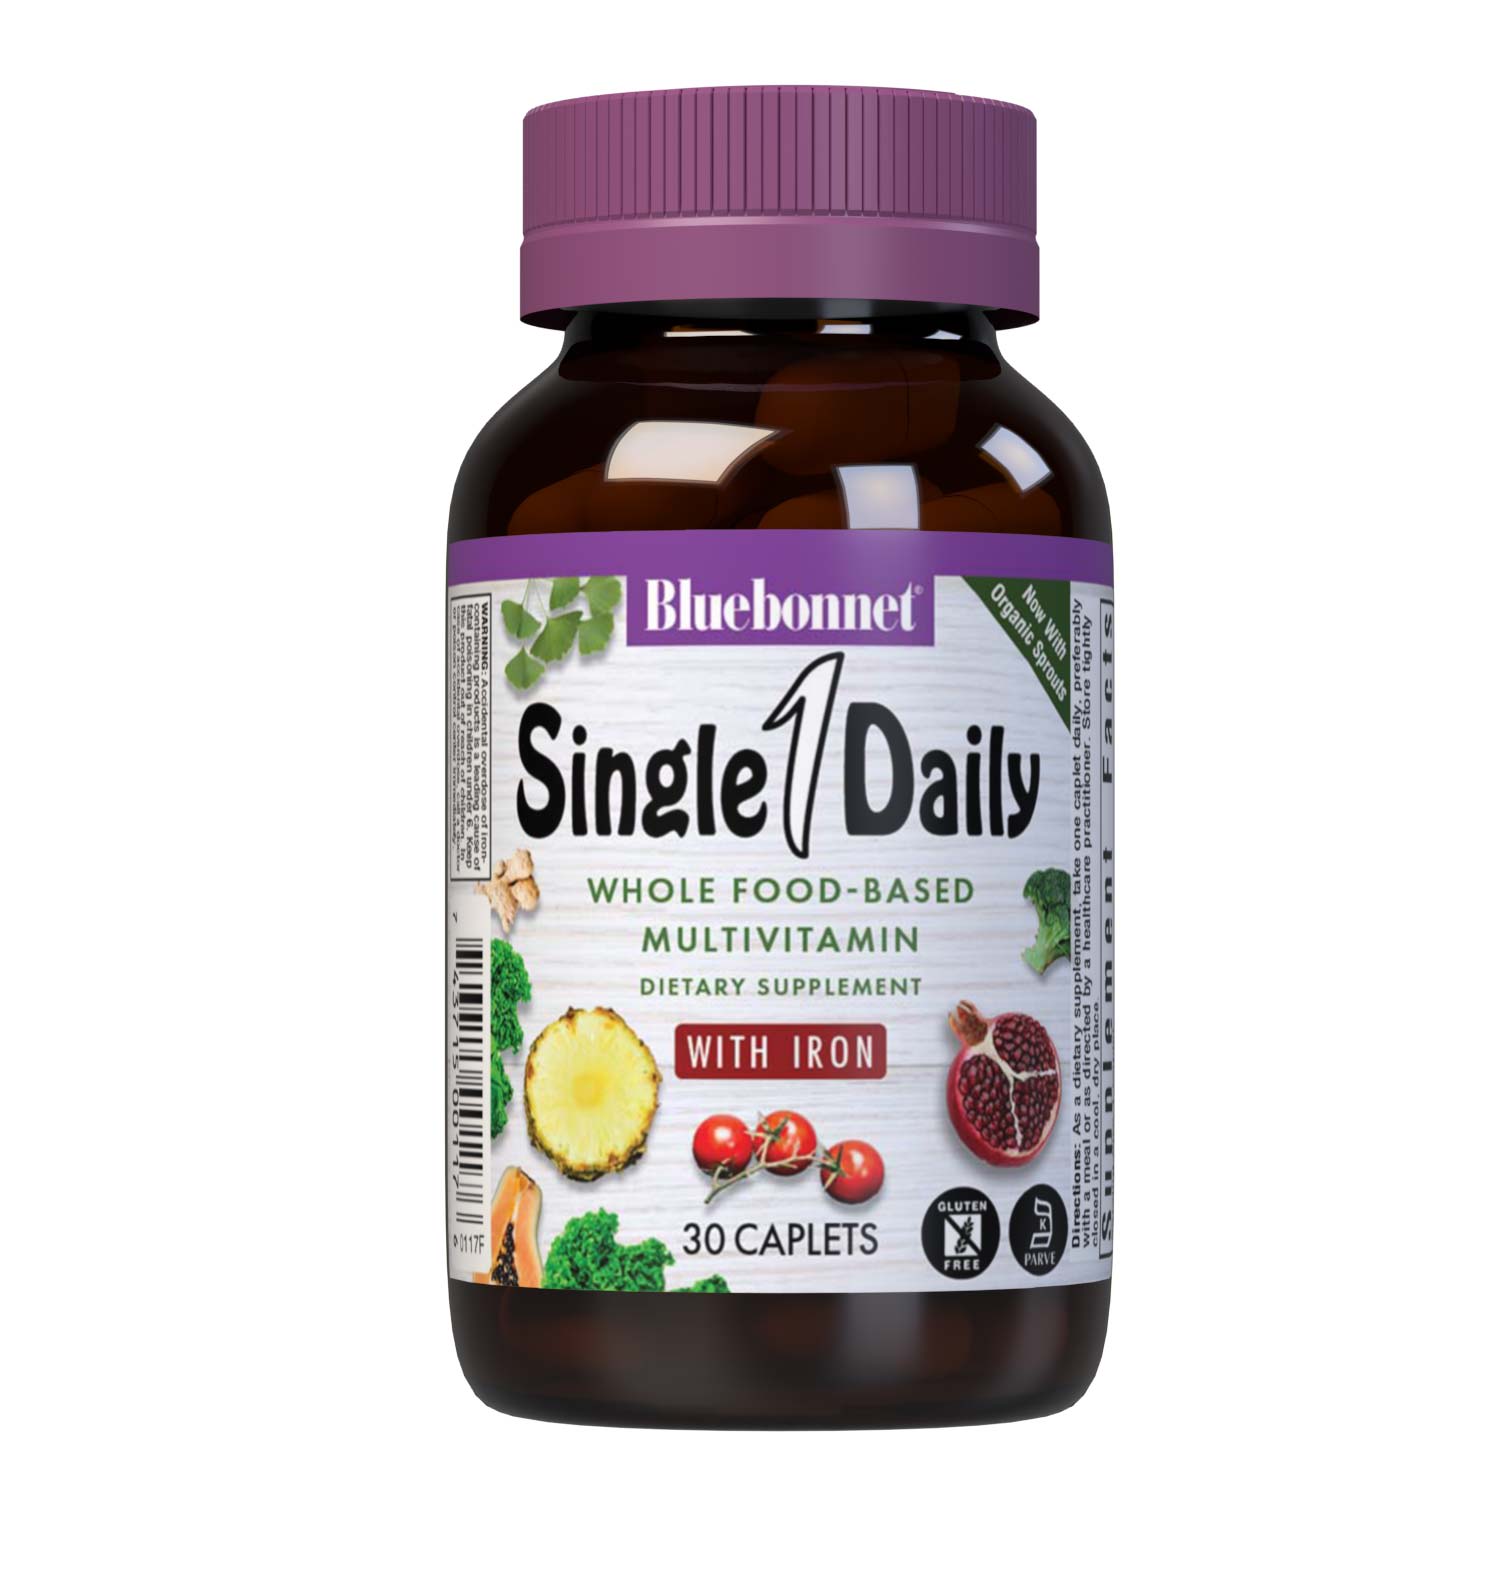 SingleDaily Multiple (With Free) 30 caplets whole food-based formula offers essential vitamins, minerals and enzymes from unique, kosher-certified, plant-based ingredients, such as adaptogenic and immune-boosting herbs, greens from nutrient-dense spirulina, chlorella and chlorophyll, lycopene from tomatoes and potent anti-aging antioxidants from pomegranate fruit. #size_30 count